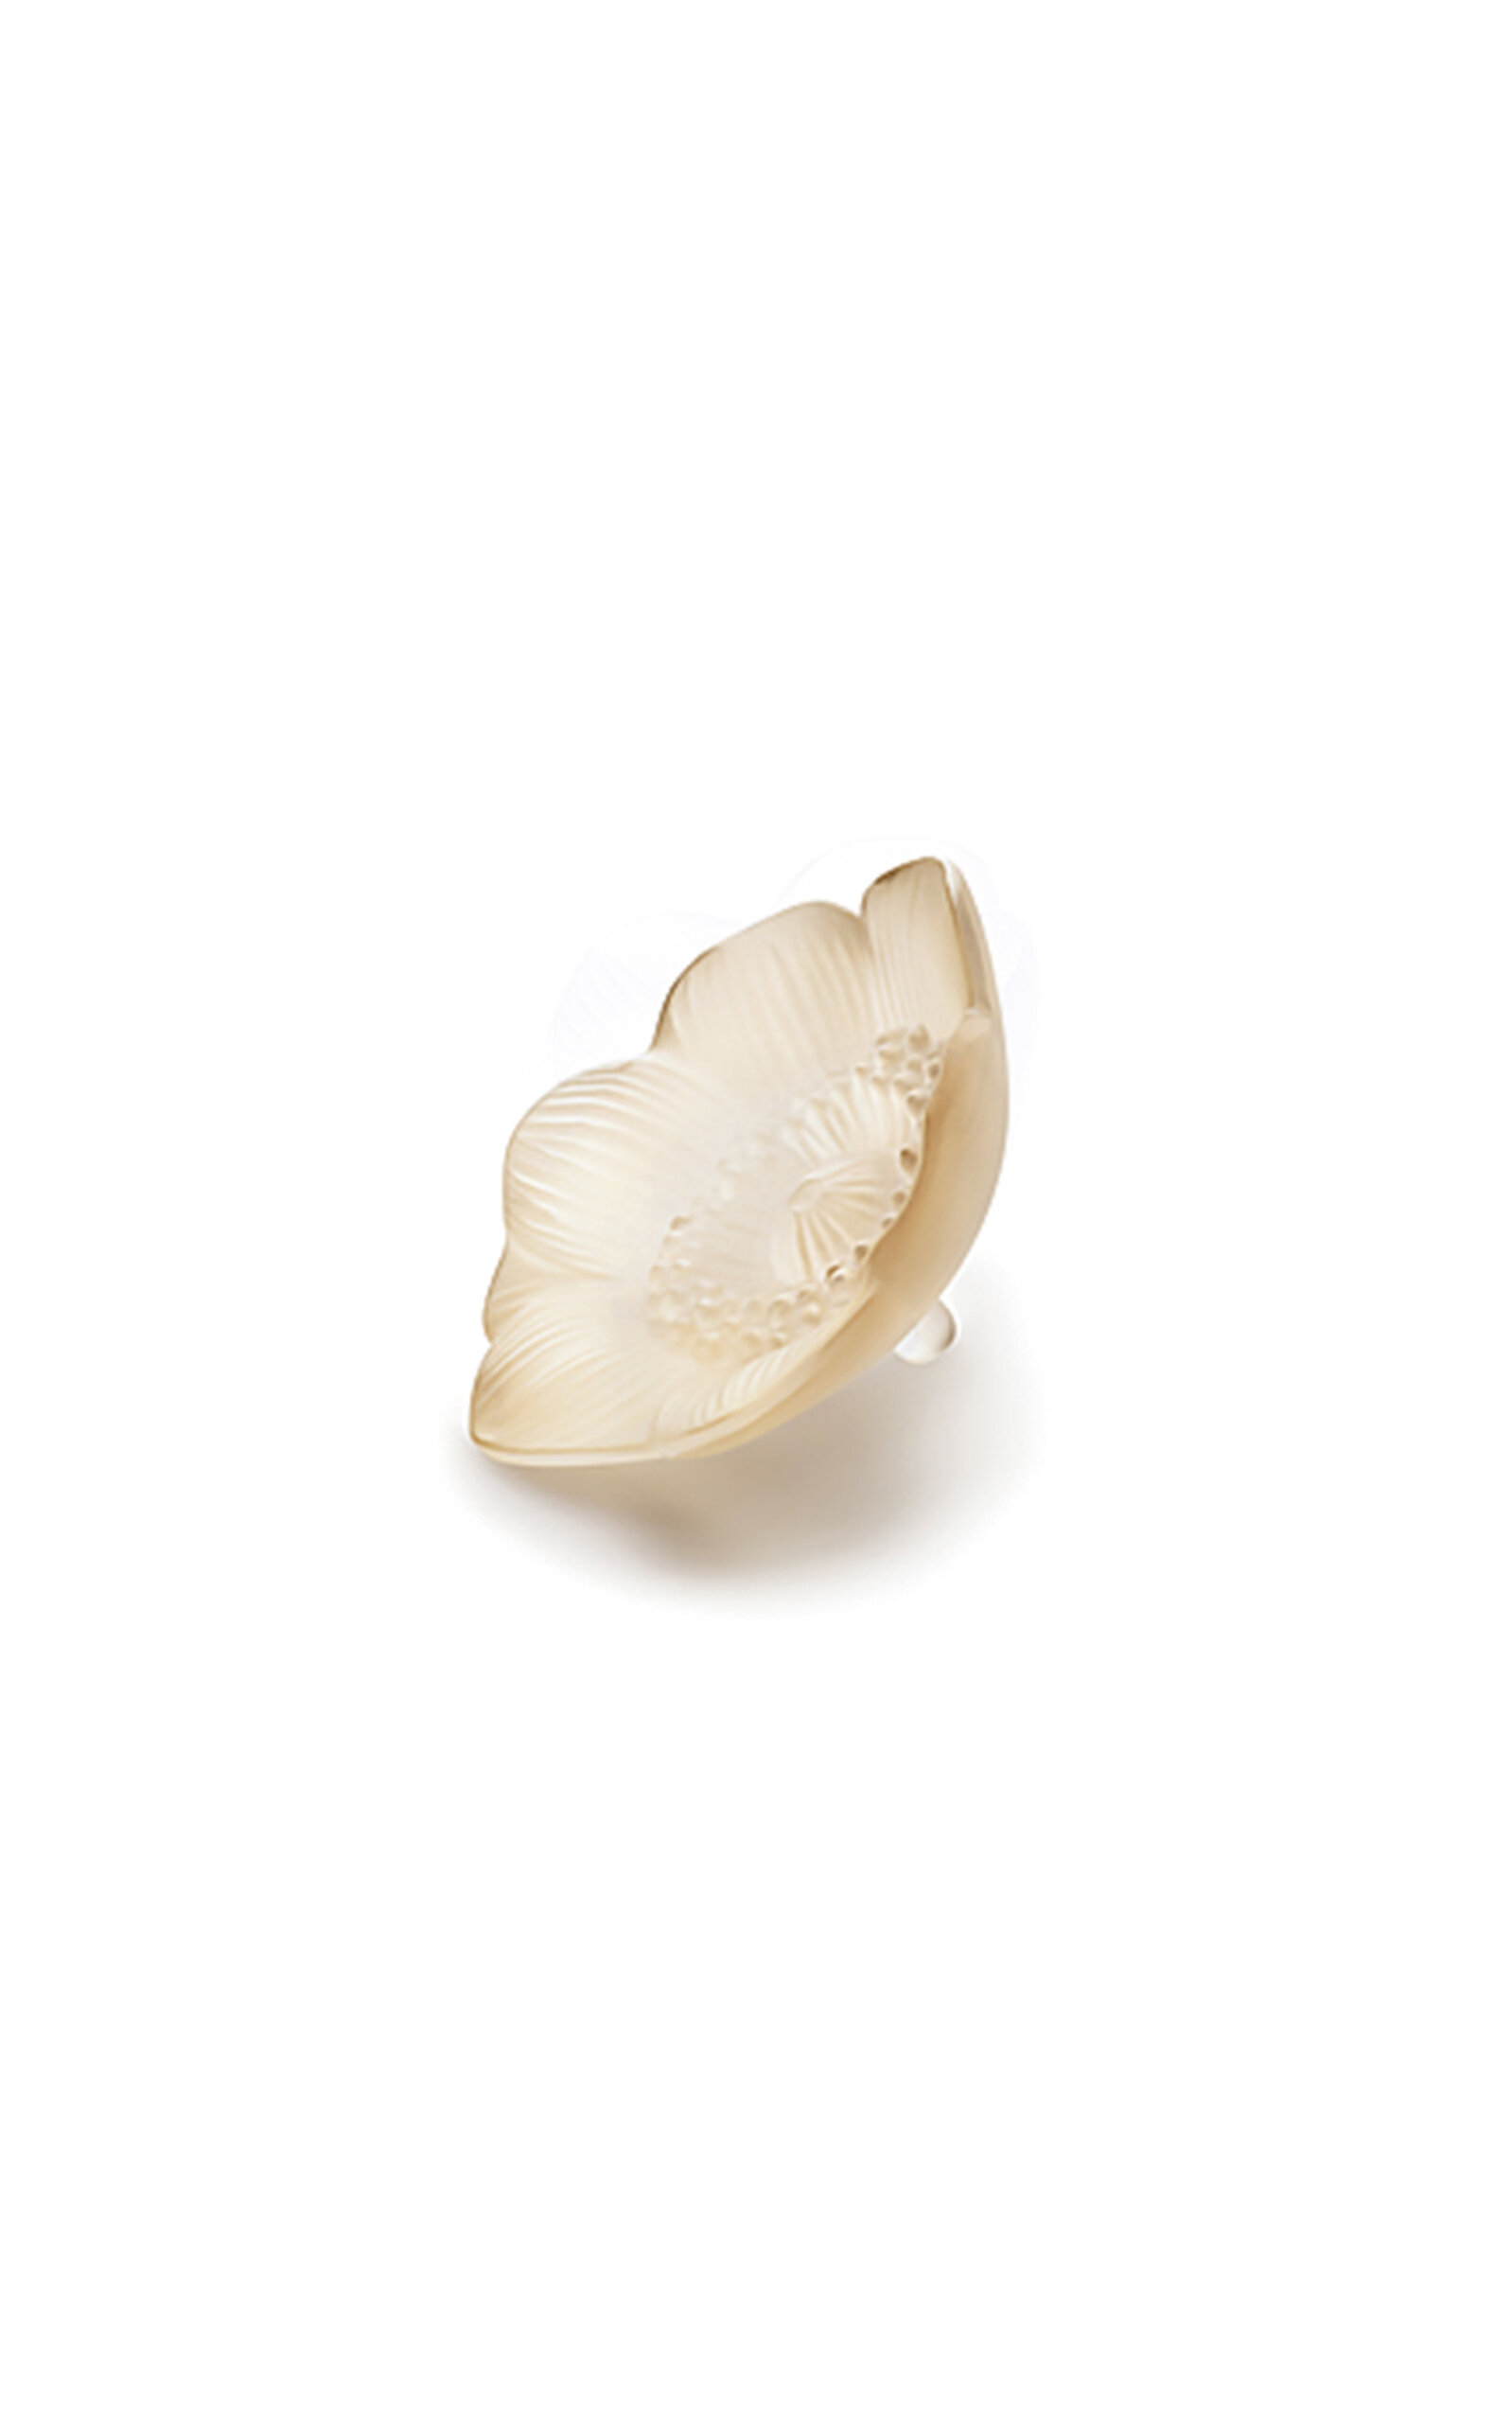 Lalique Anemone Small Sculpture In Gold